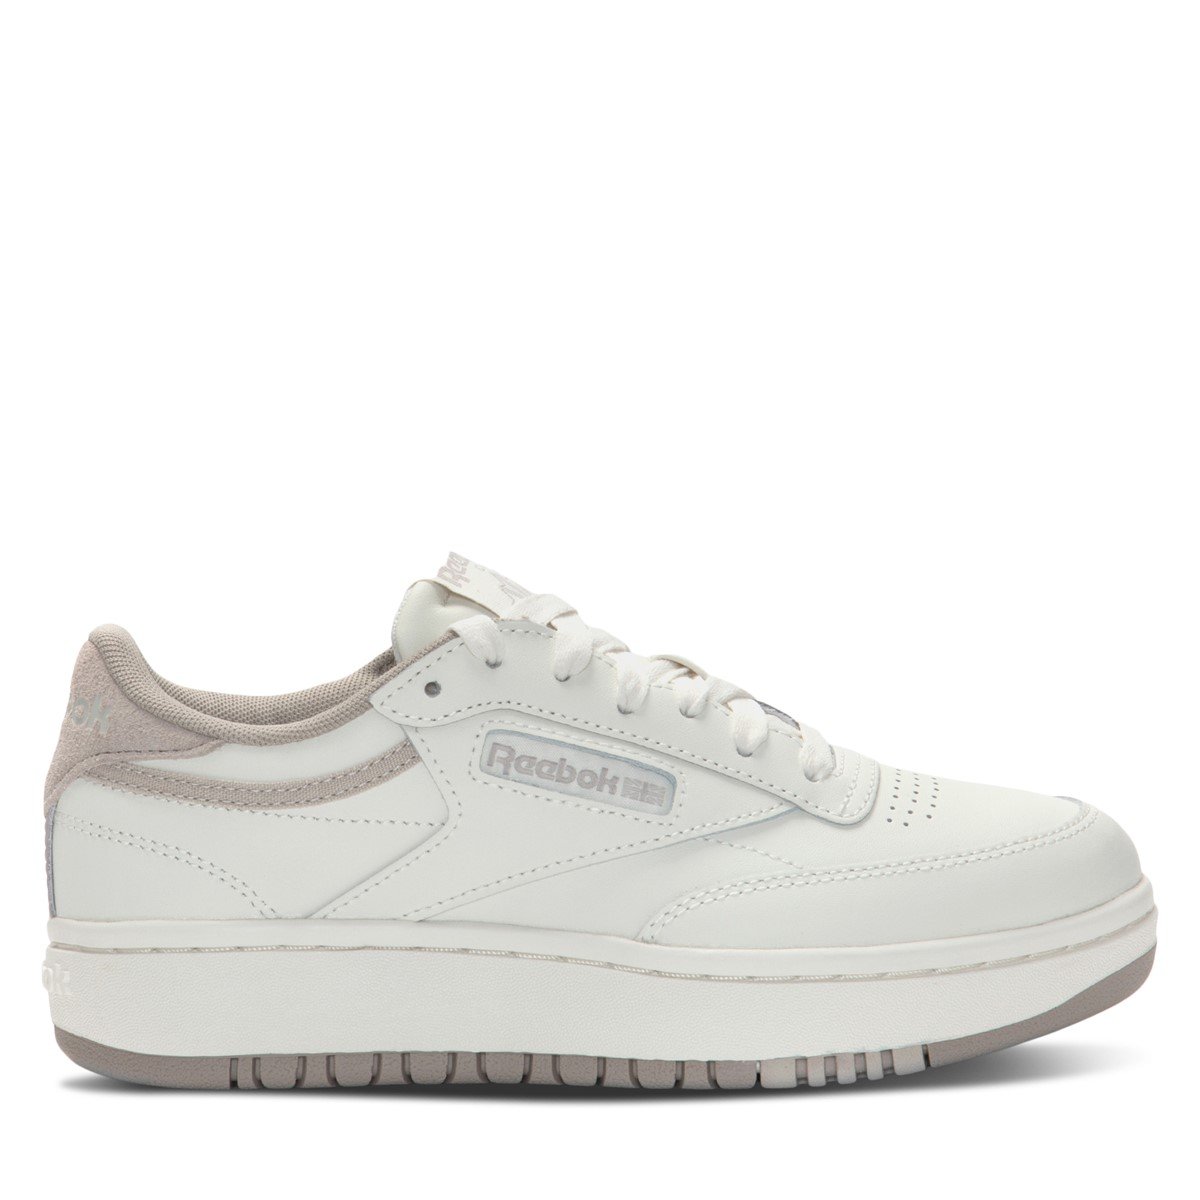 Women's Club C Double Revenge Sneakers in White/Taupe